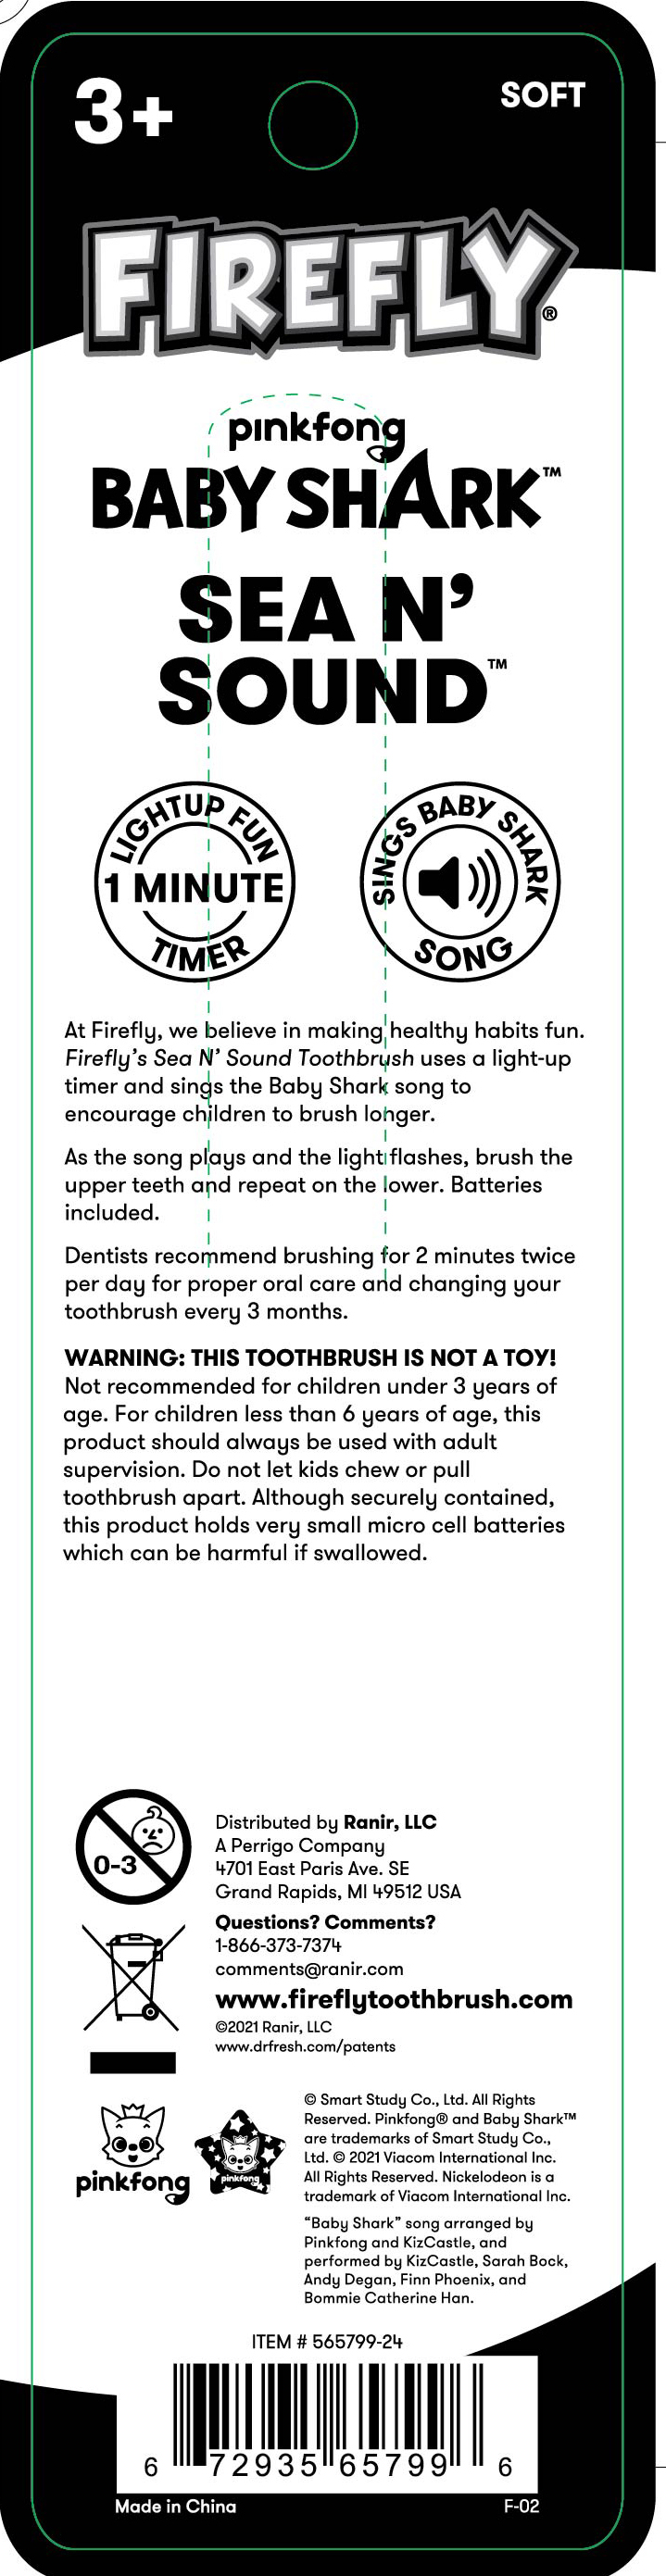 Firefly Sea N' Sound, Baby Shark Toothbrush, Premium Soft Bristles, Ages 3+, 1 Count - image 3 of 10